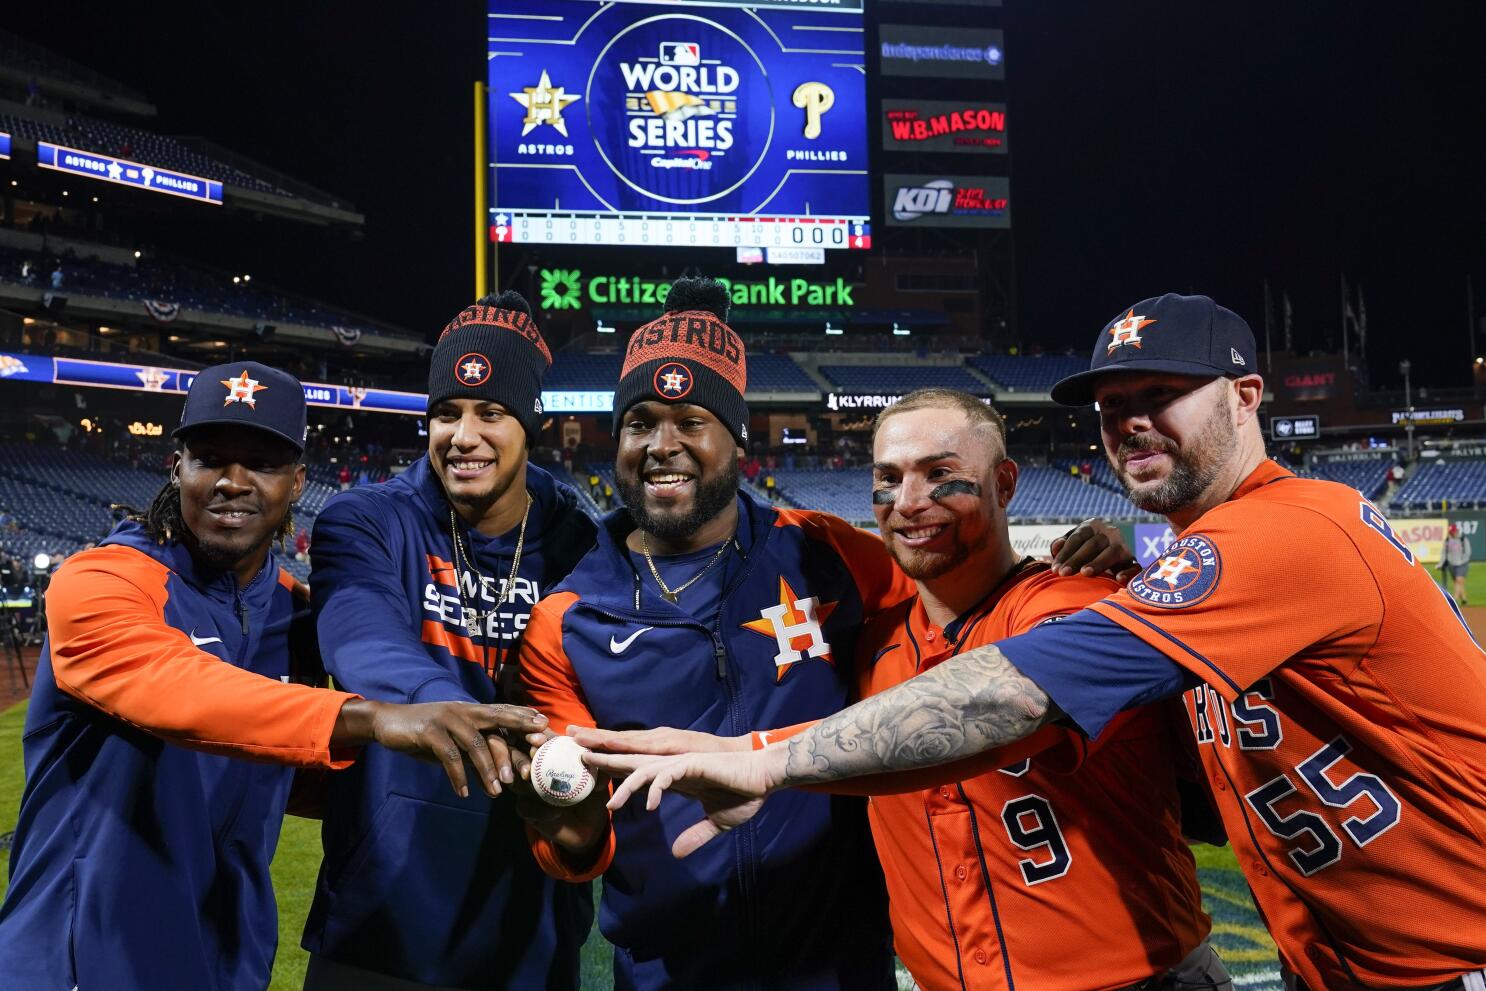 Javier, Astros pitch 2nd no-hitter in World Series history - The